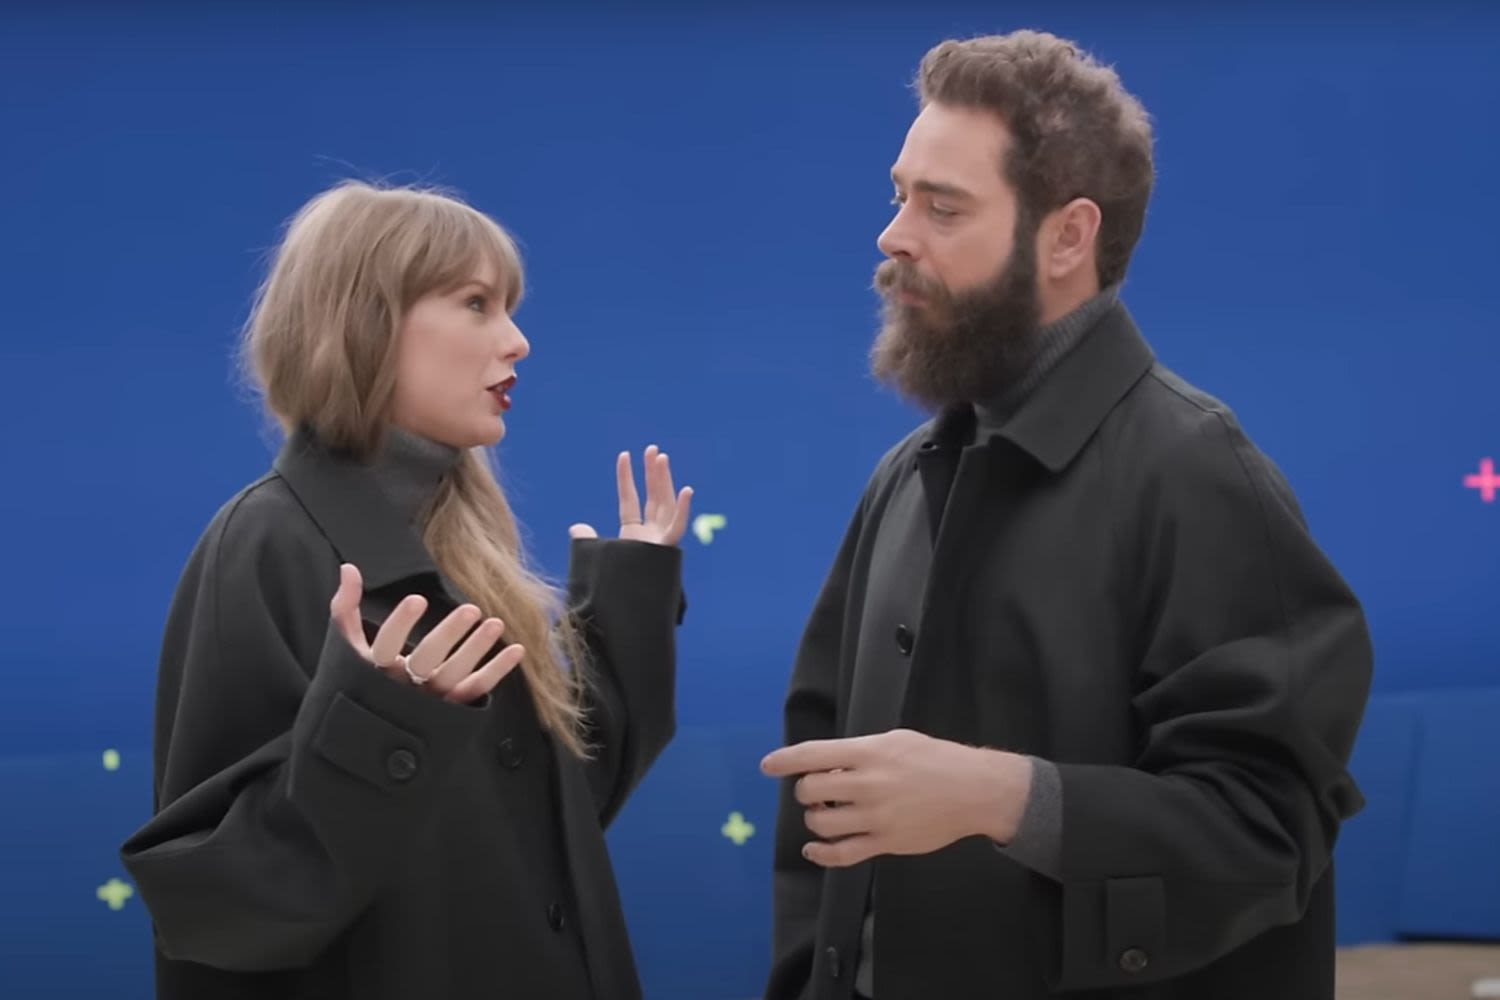 Post Malone Calls Taylor Swift ‘One Take Tay’ in New ‘Fortnight’ Behind-the-Scenes Video: ‘You Went Nuts’